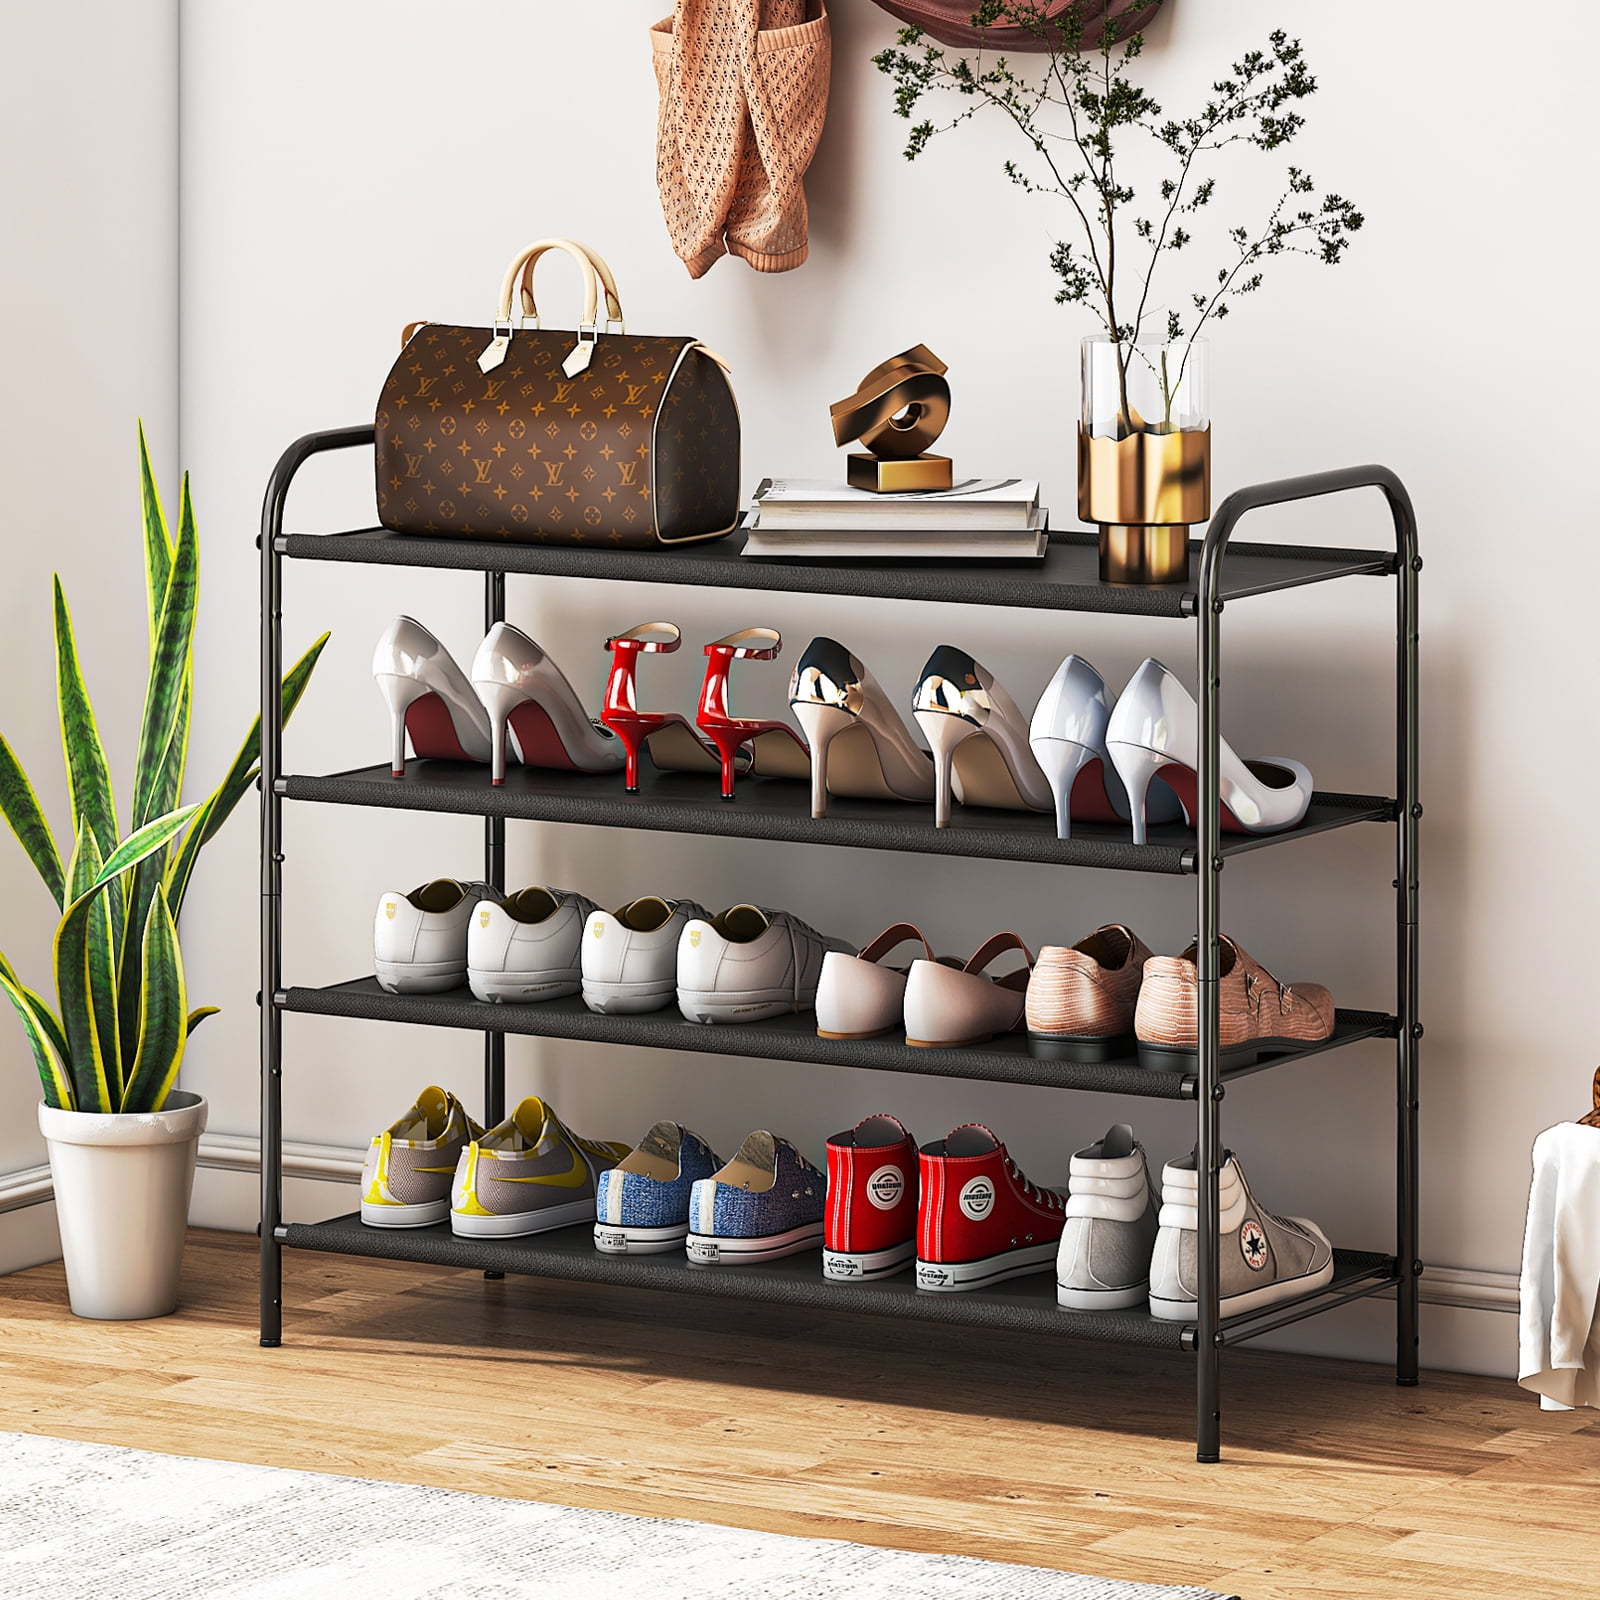 10 Tier Shoes Rack with Cover, Shoes Racks Organizer for Closet, Black  Large Shoe Shelf for Entryway,50 Pair Large Shoe Stand, Non-Woven Shoe  Storage